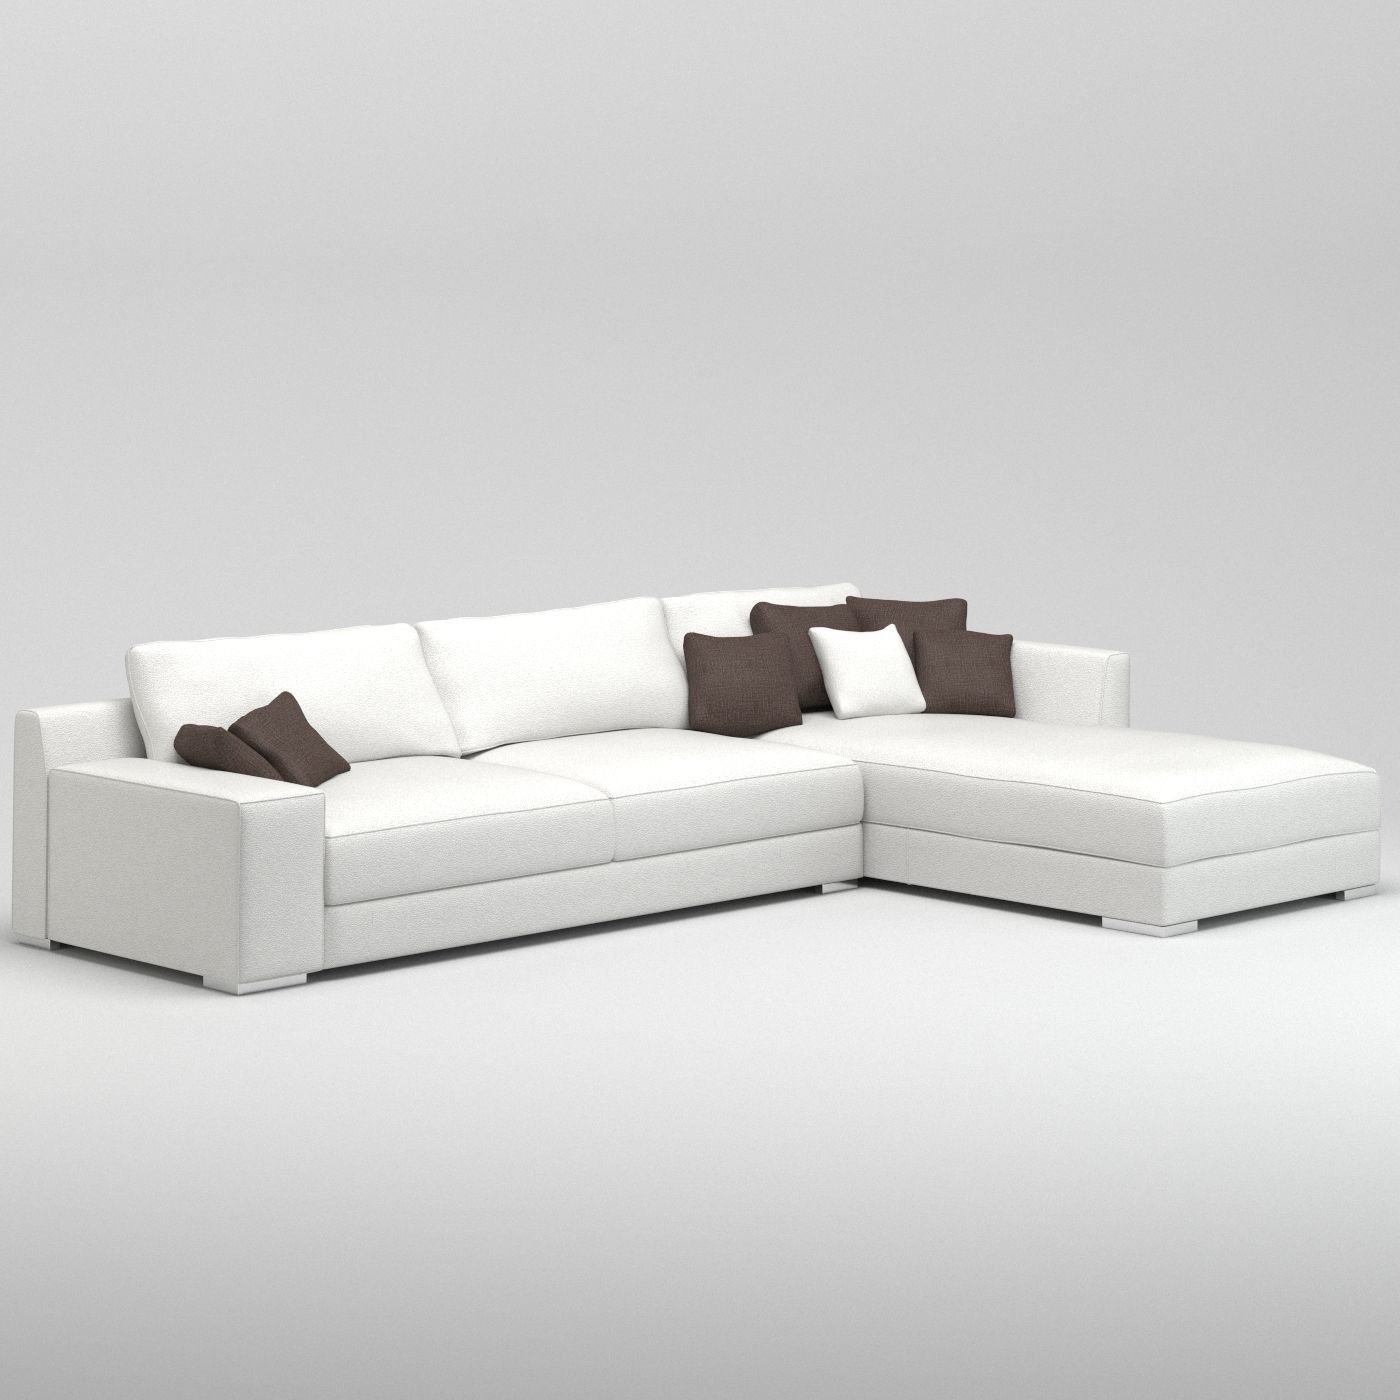 Furniture : Couchtuner Queen Sugar Sectional Sofa Greenville Sc In Greenville Sc Sectional Sofas (Photo 6 of 10)